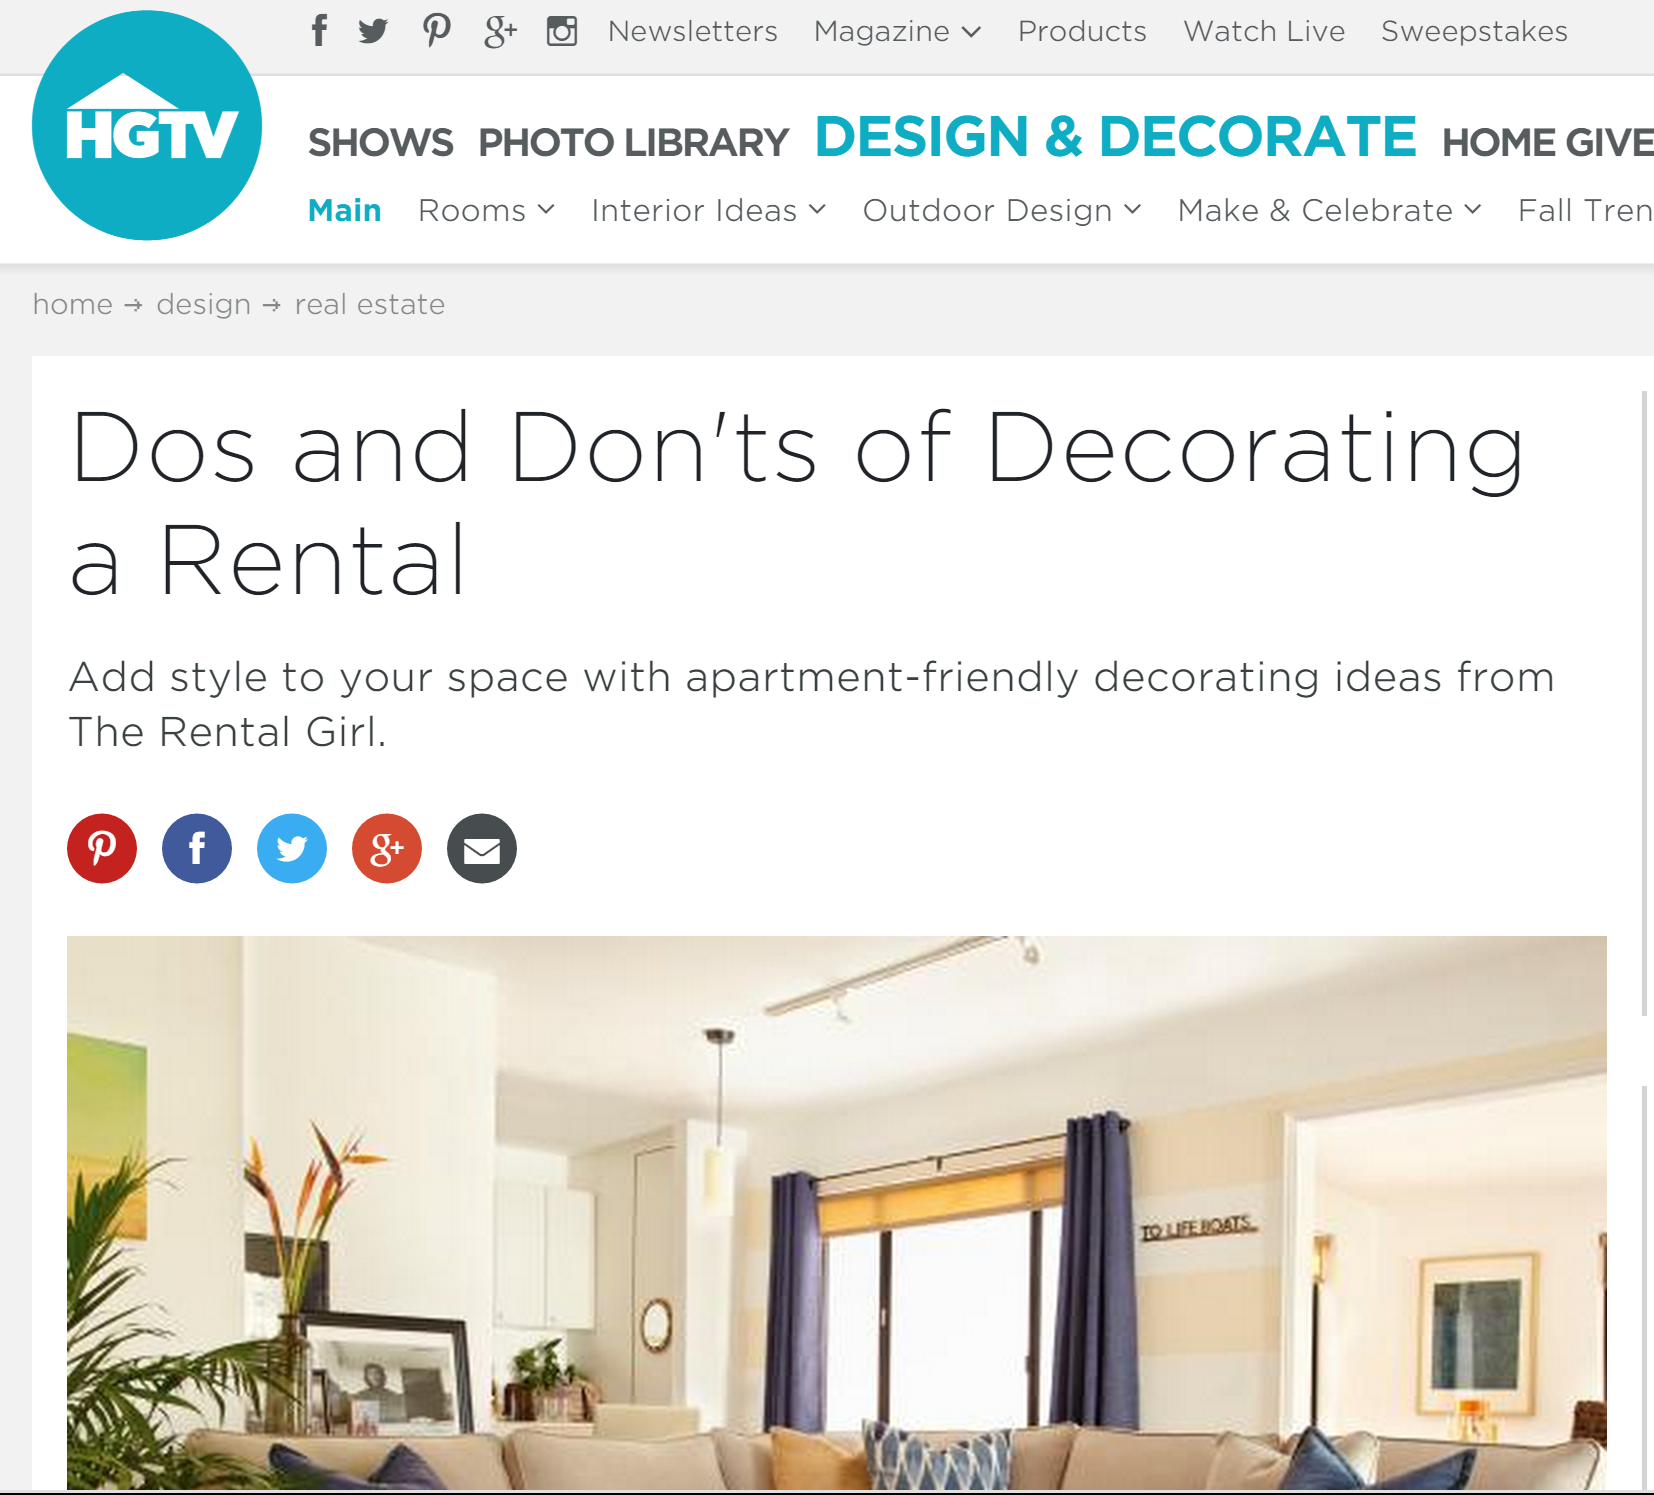 HGTV's Do's and Don'ts